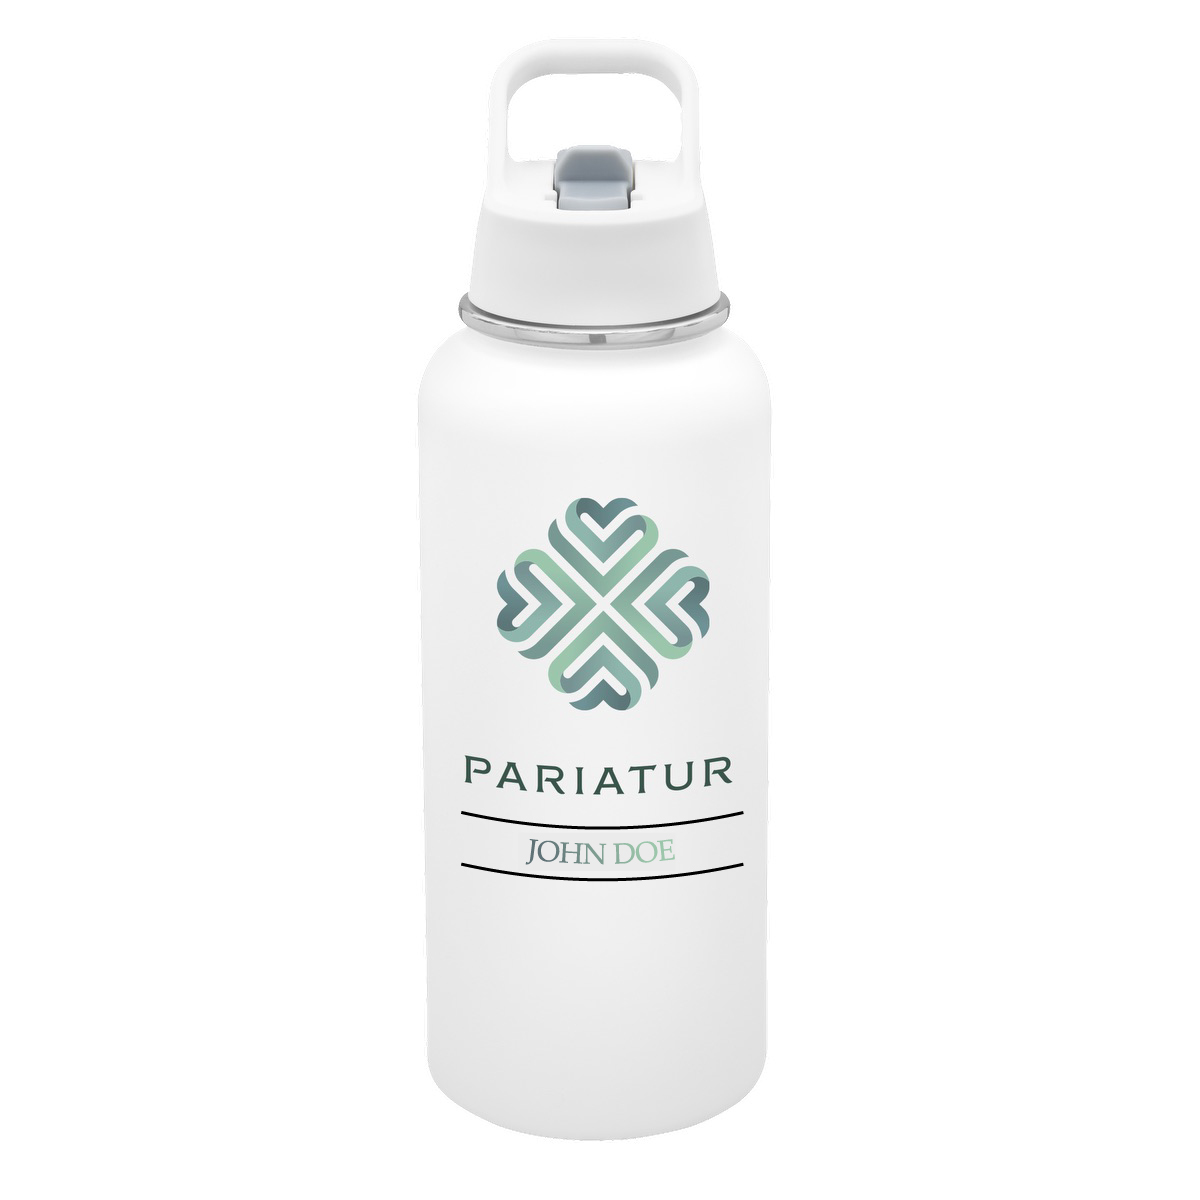 customized water bottle with logo and employee name